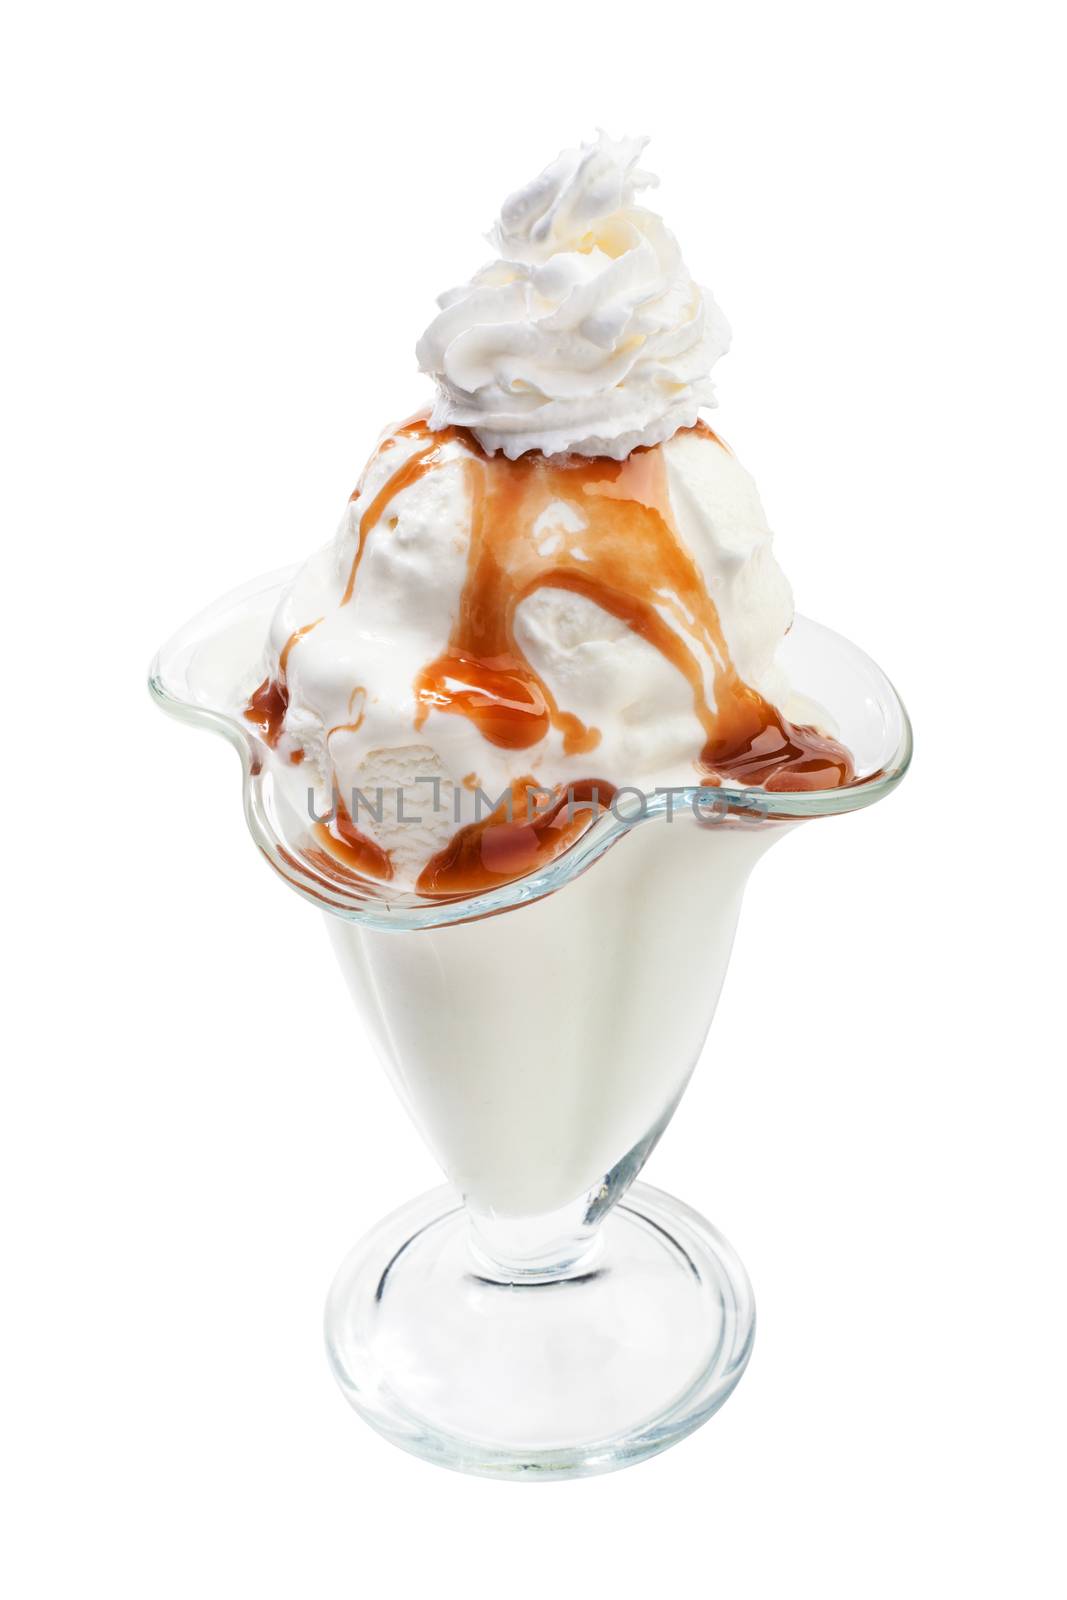 Bowl of ice cream under the caramel topping with cream on top